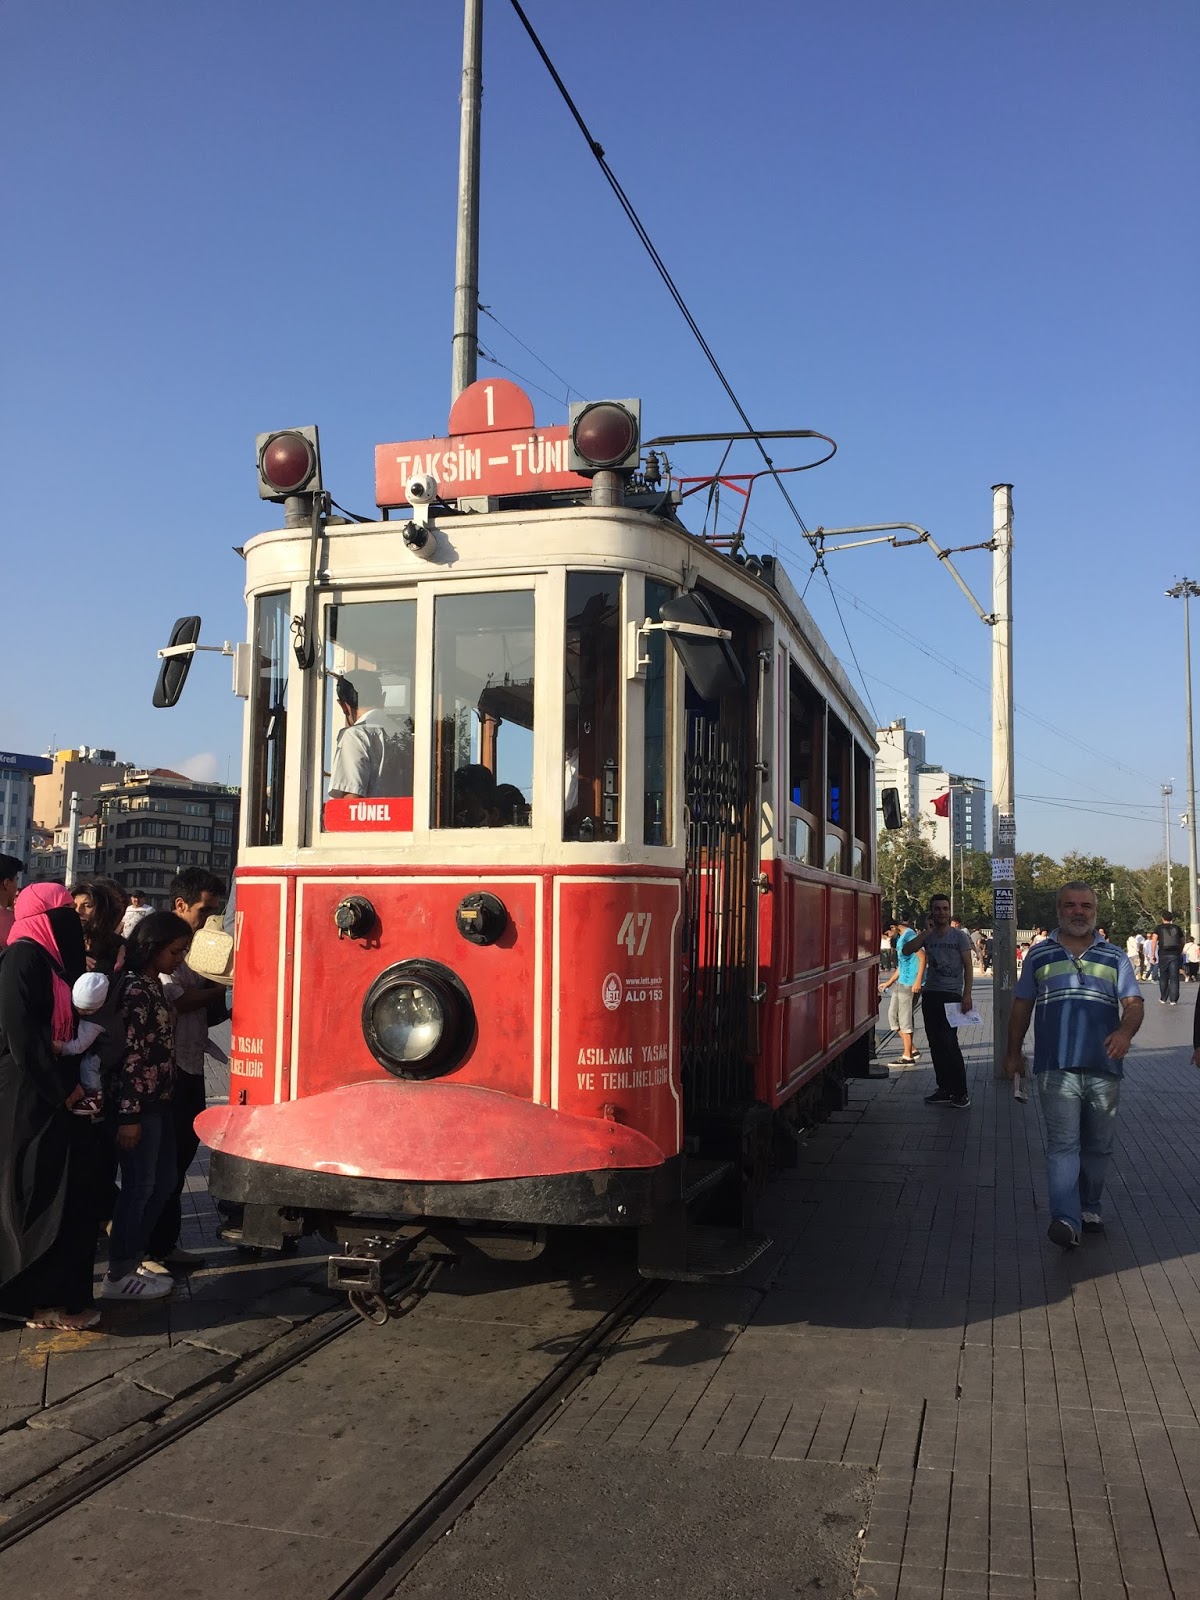 The famous tram in Taksim square